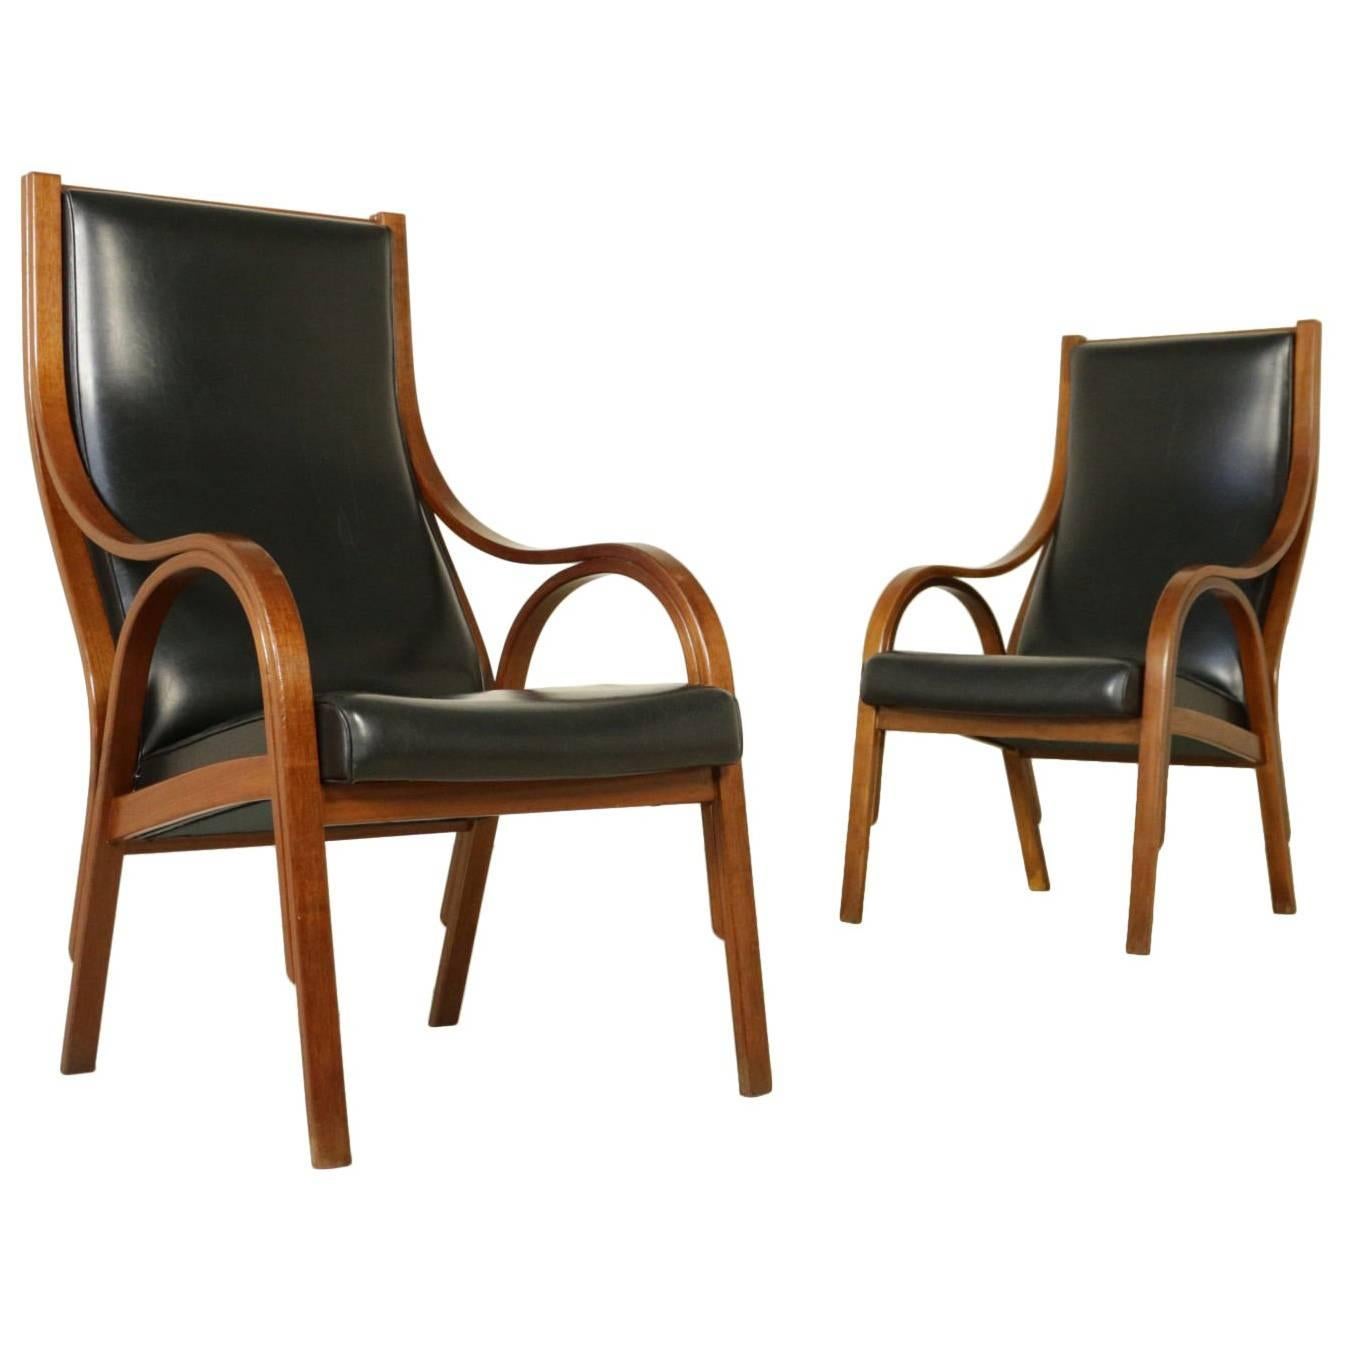 Cavour Armchairs by Stoppino, Meneghetti and Gregotti